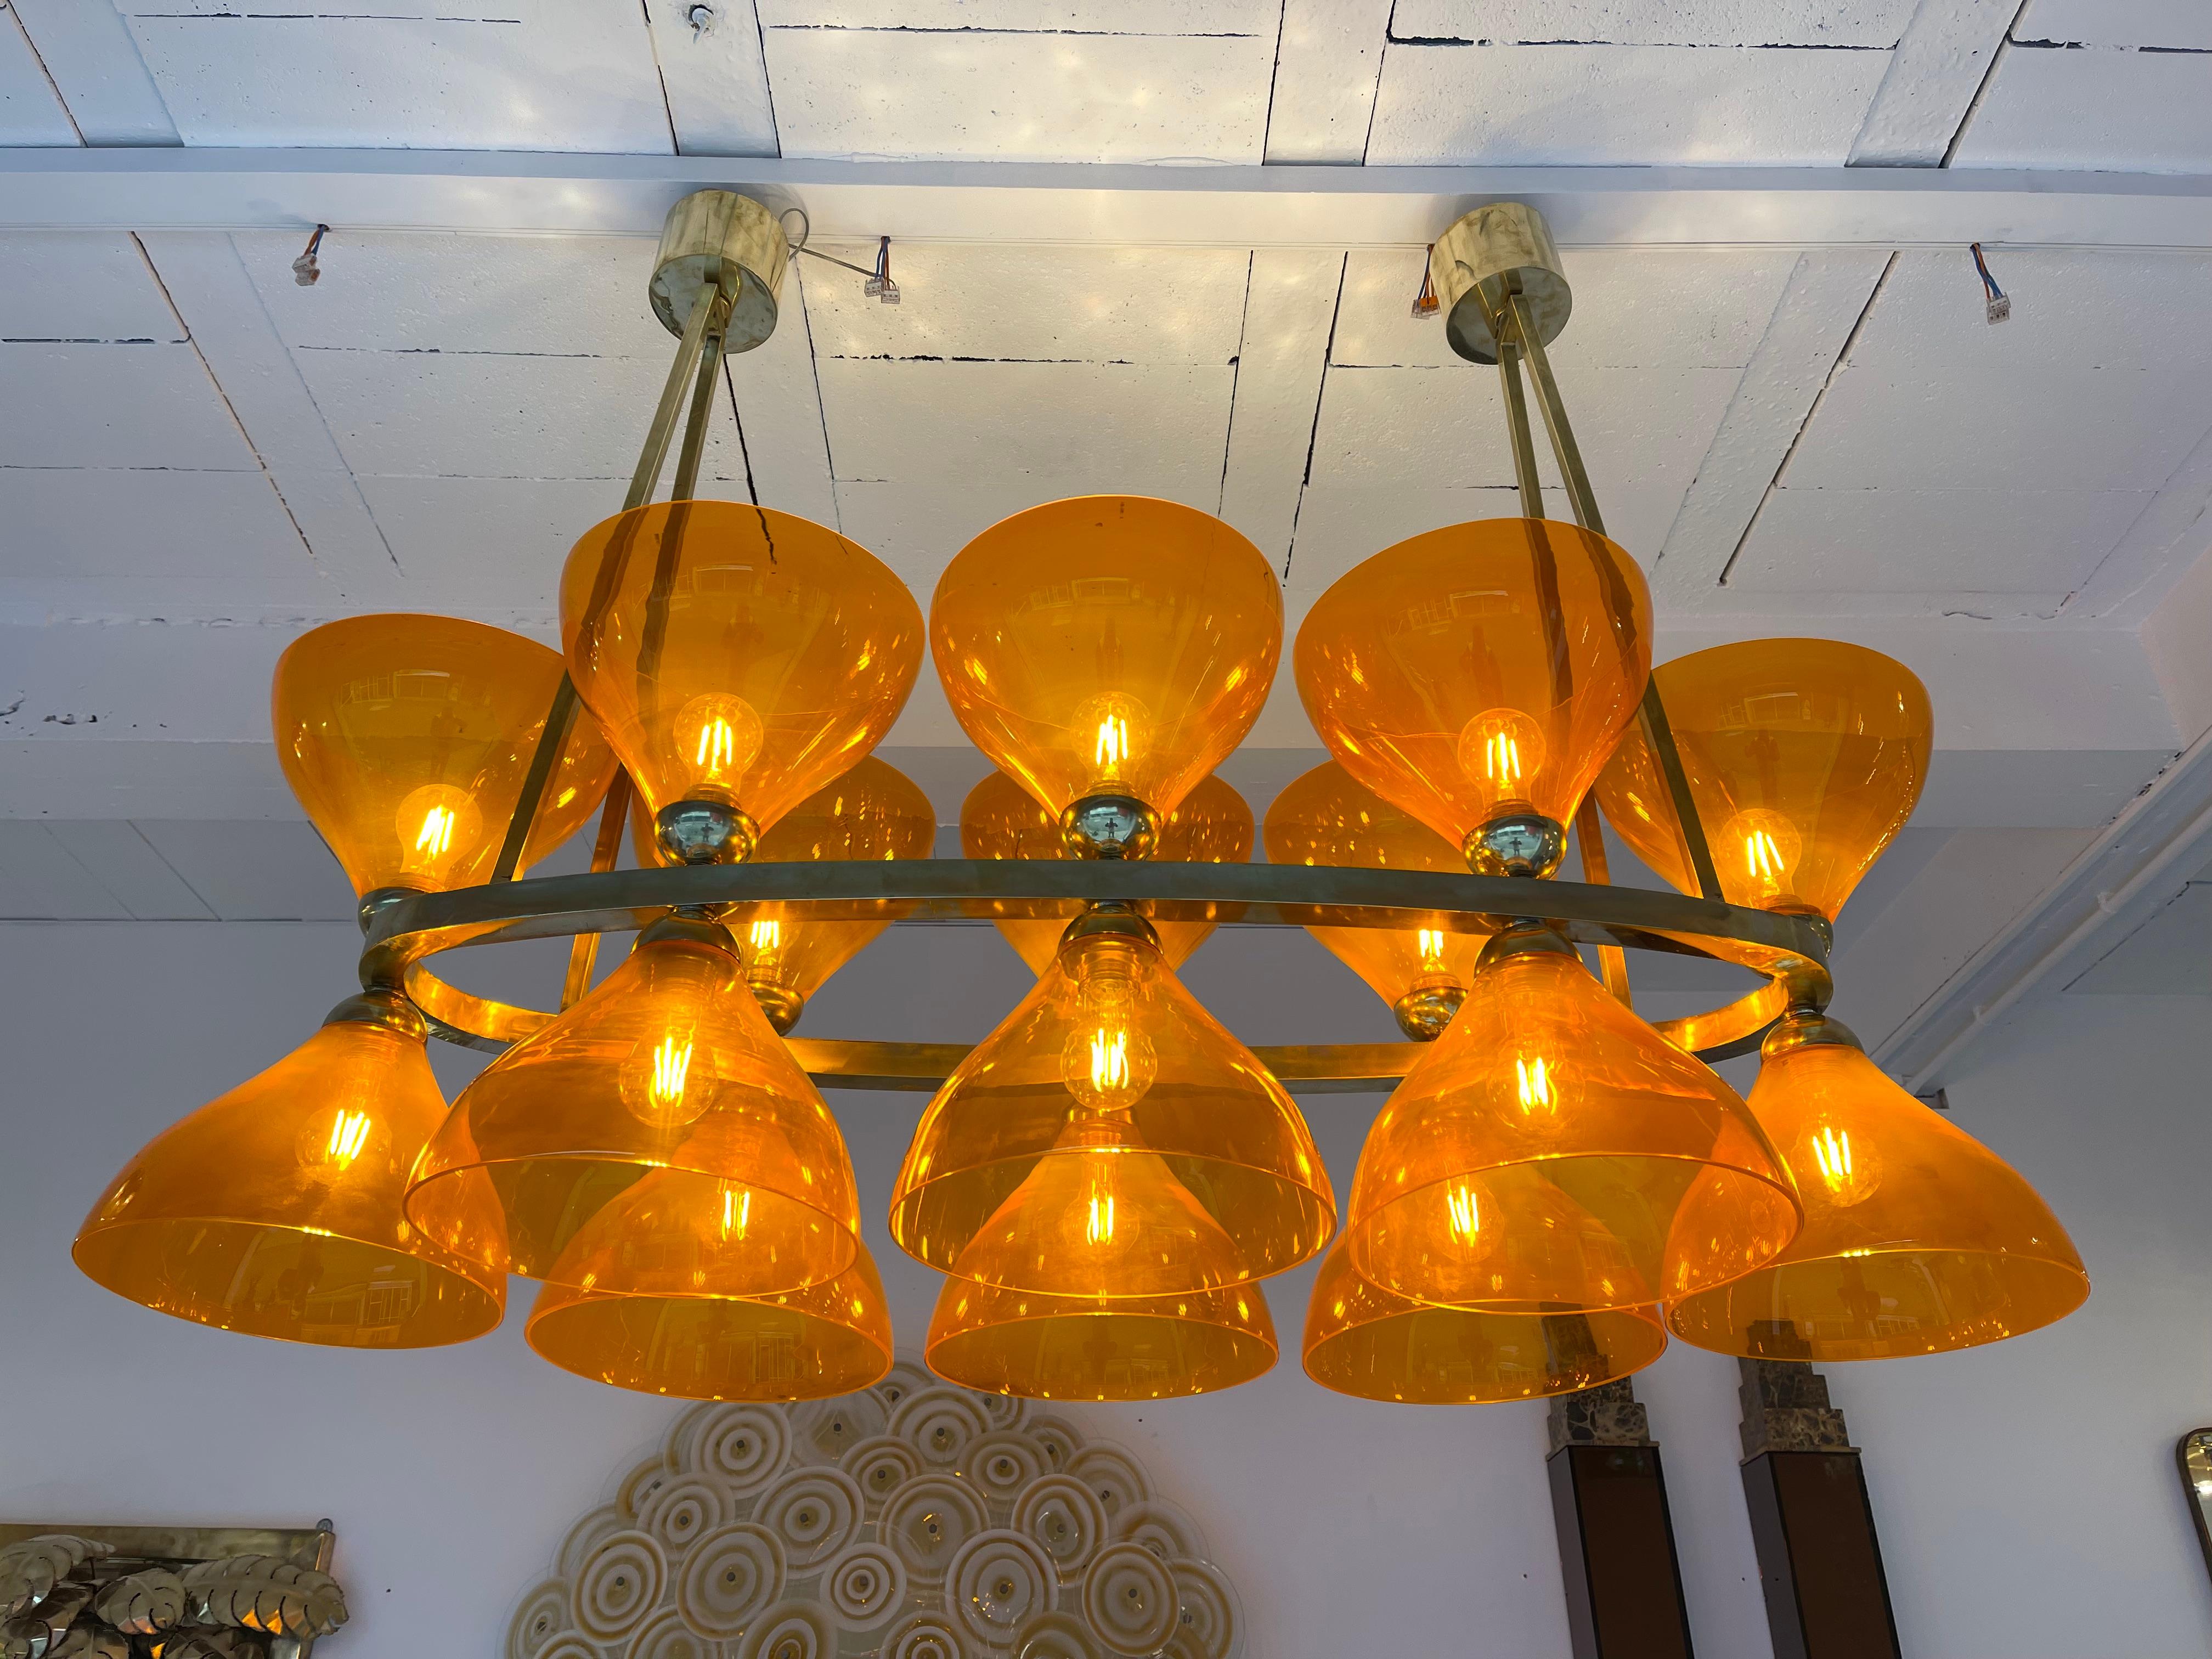 Large brass chandelier ceiling pendant light lamp with large Orange Murano glass cup. Made with old stock of glass from the manufacture Vistosi. High quality glass, original stamp from the manufacture. Contemporary work from a small italian